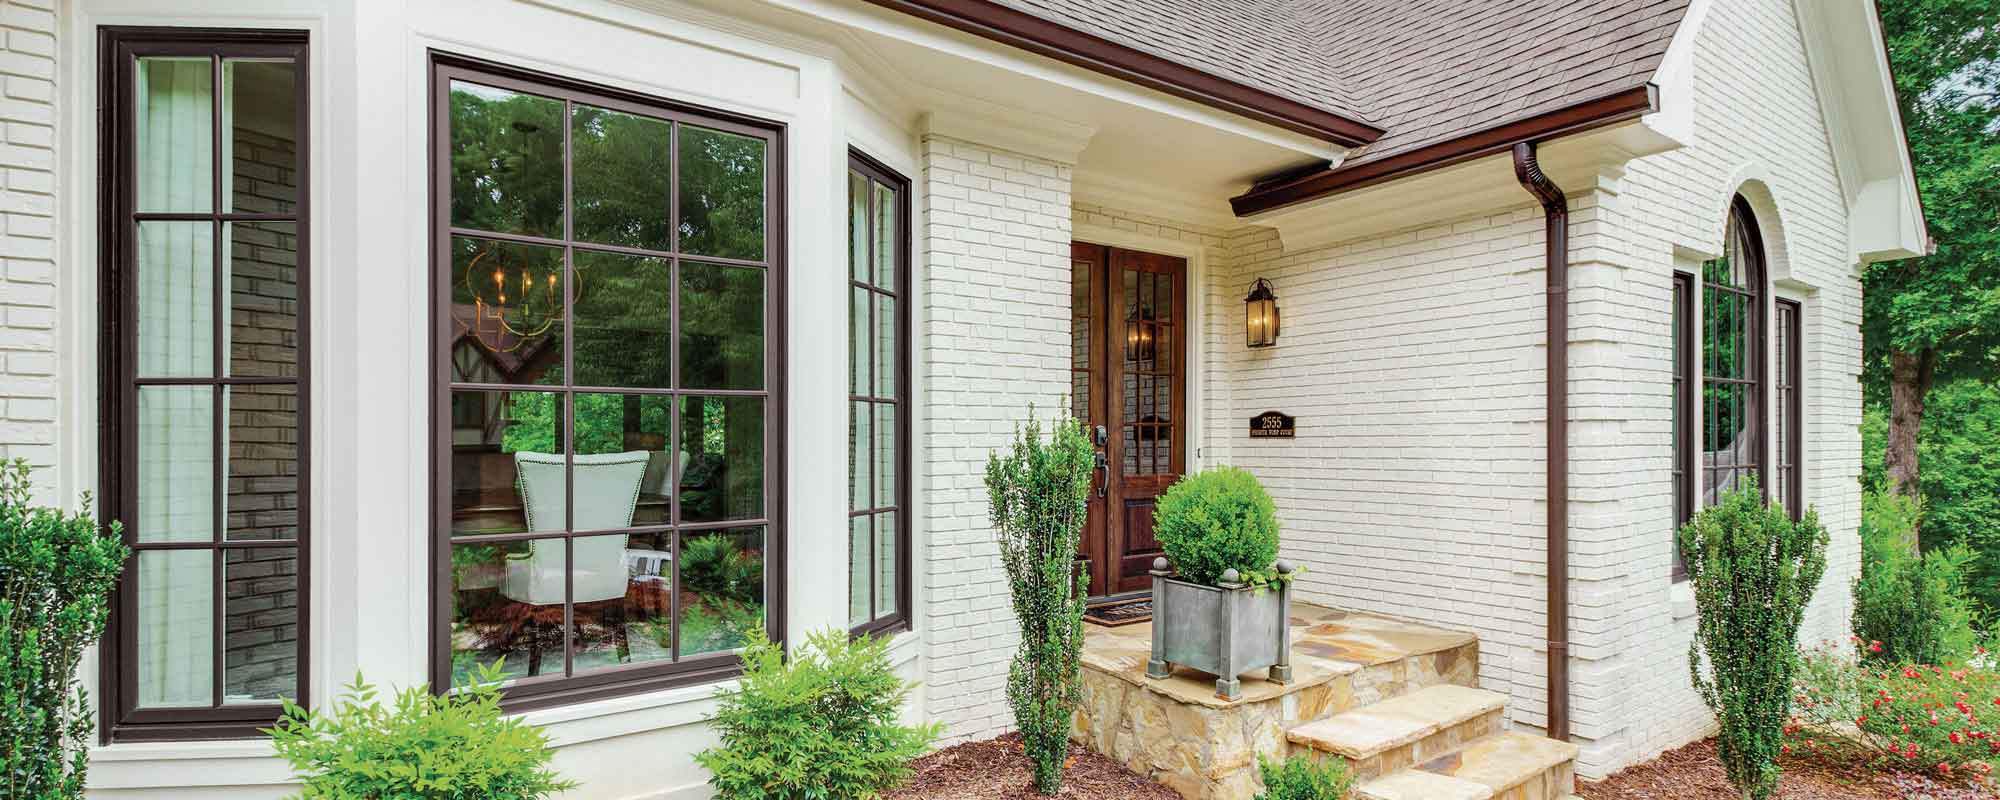 Spring Cleaning Tips For Your Home’s Windows